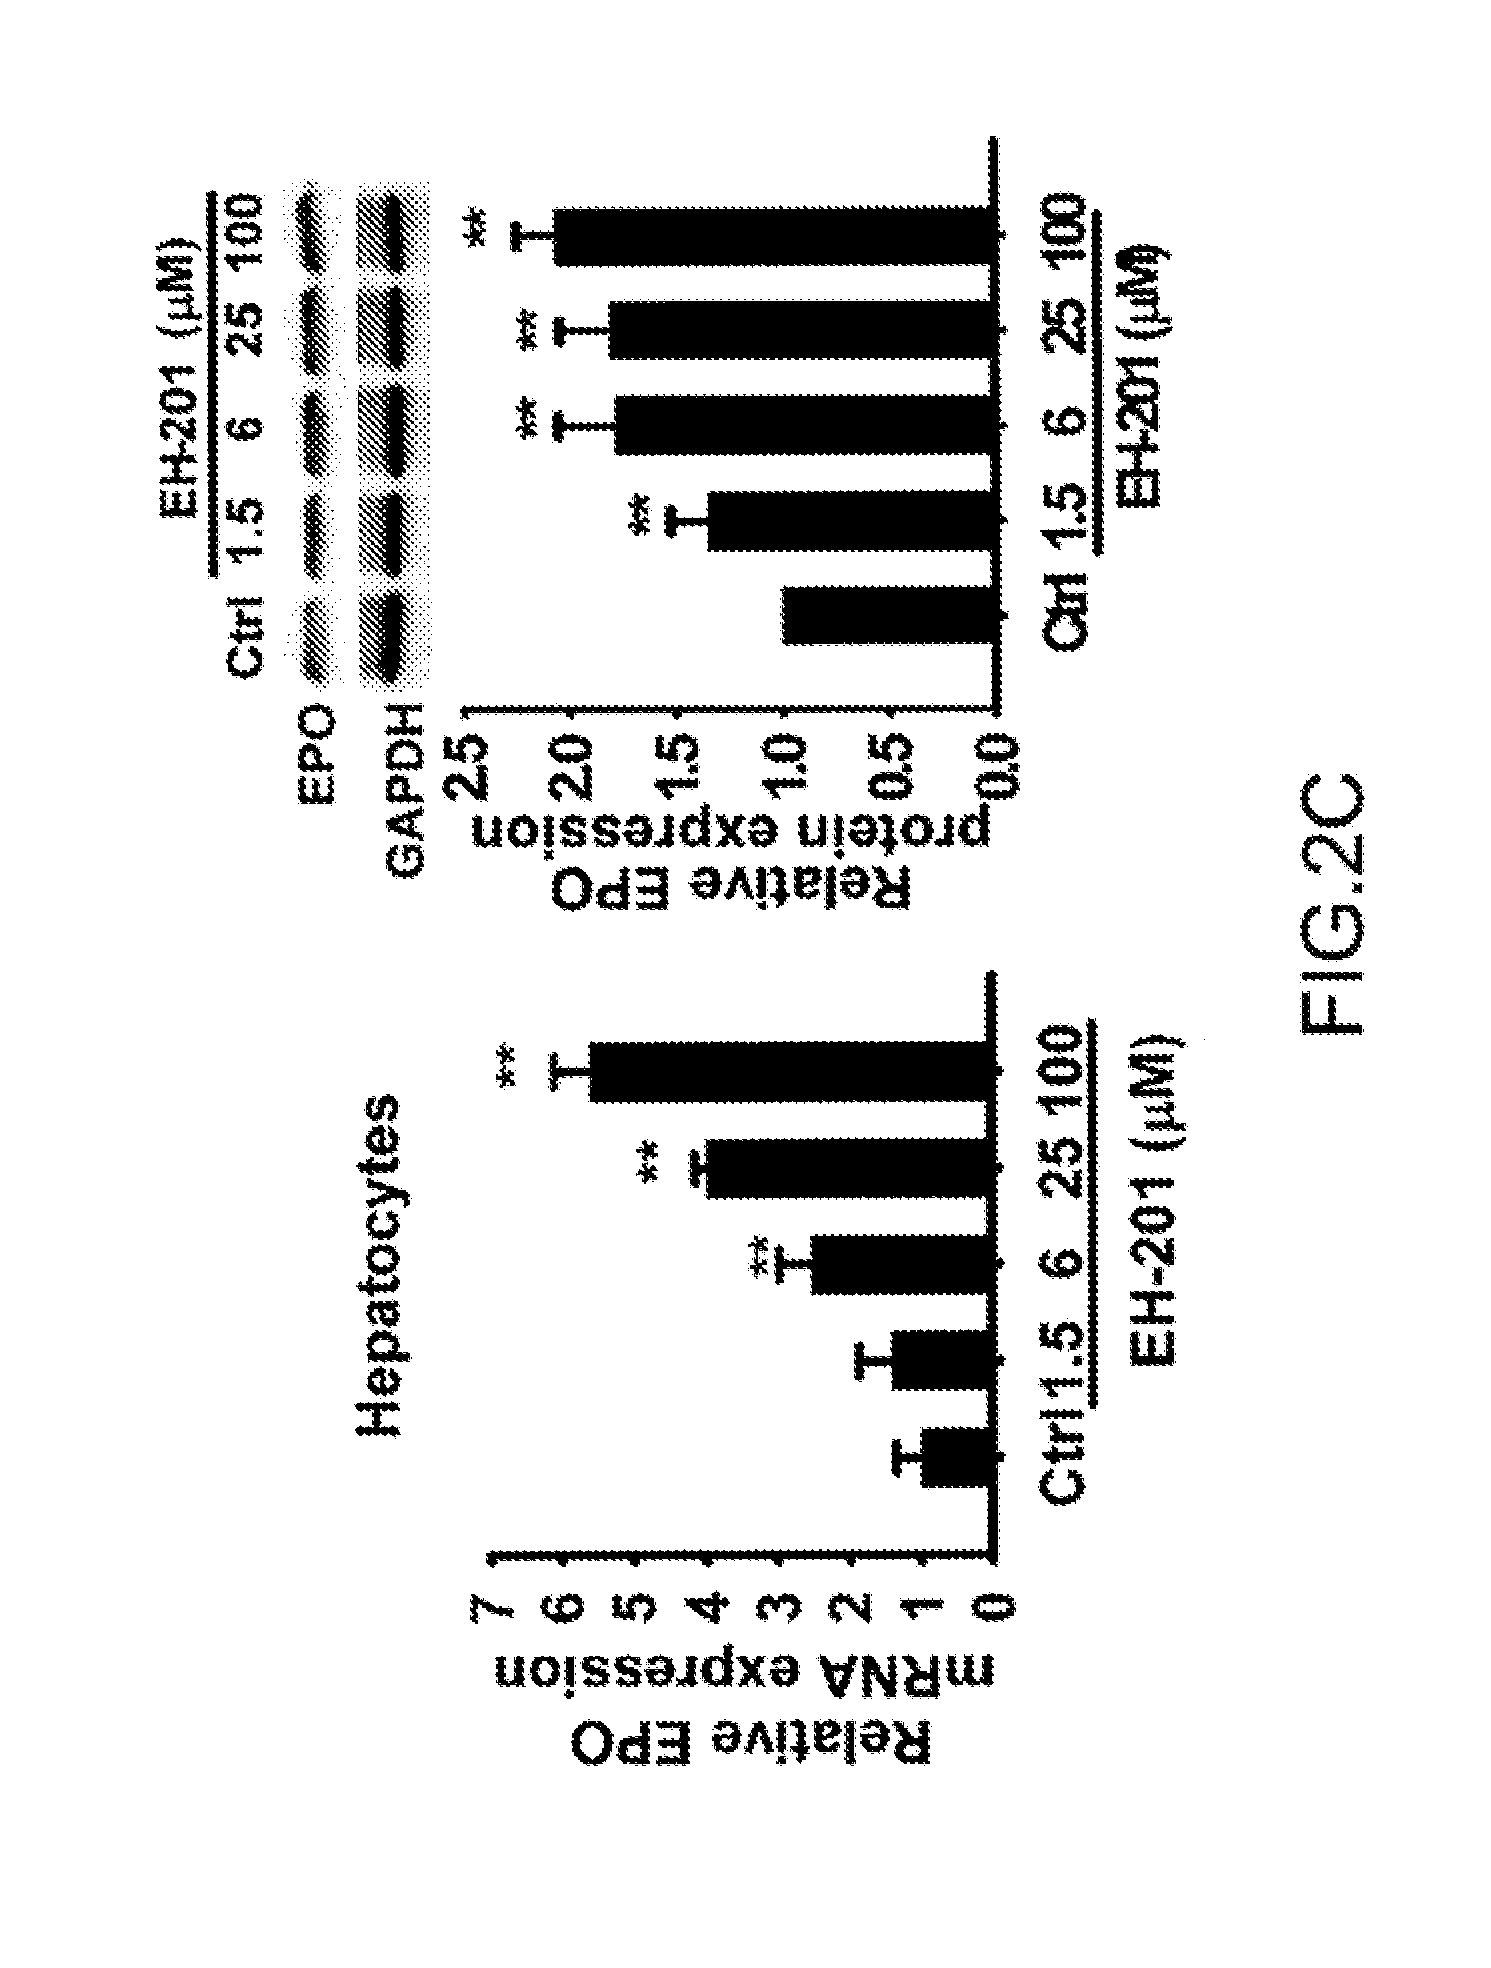 Composition and method for inducing EPO-mediated haemoglobin expression and mitochondrial biogenesis in nonhaematopoietic cell